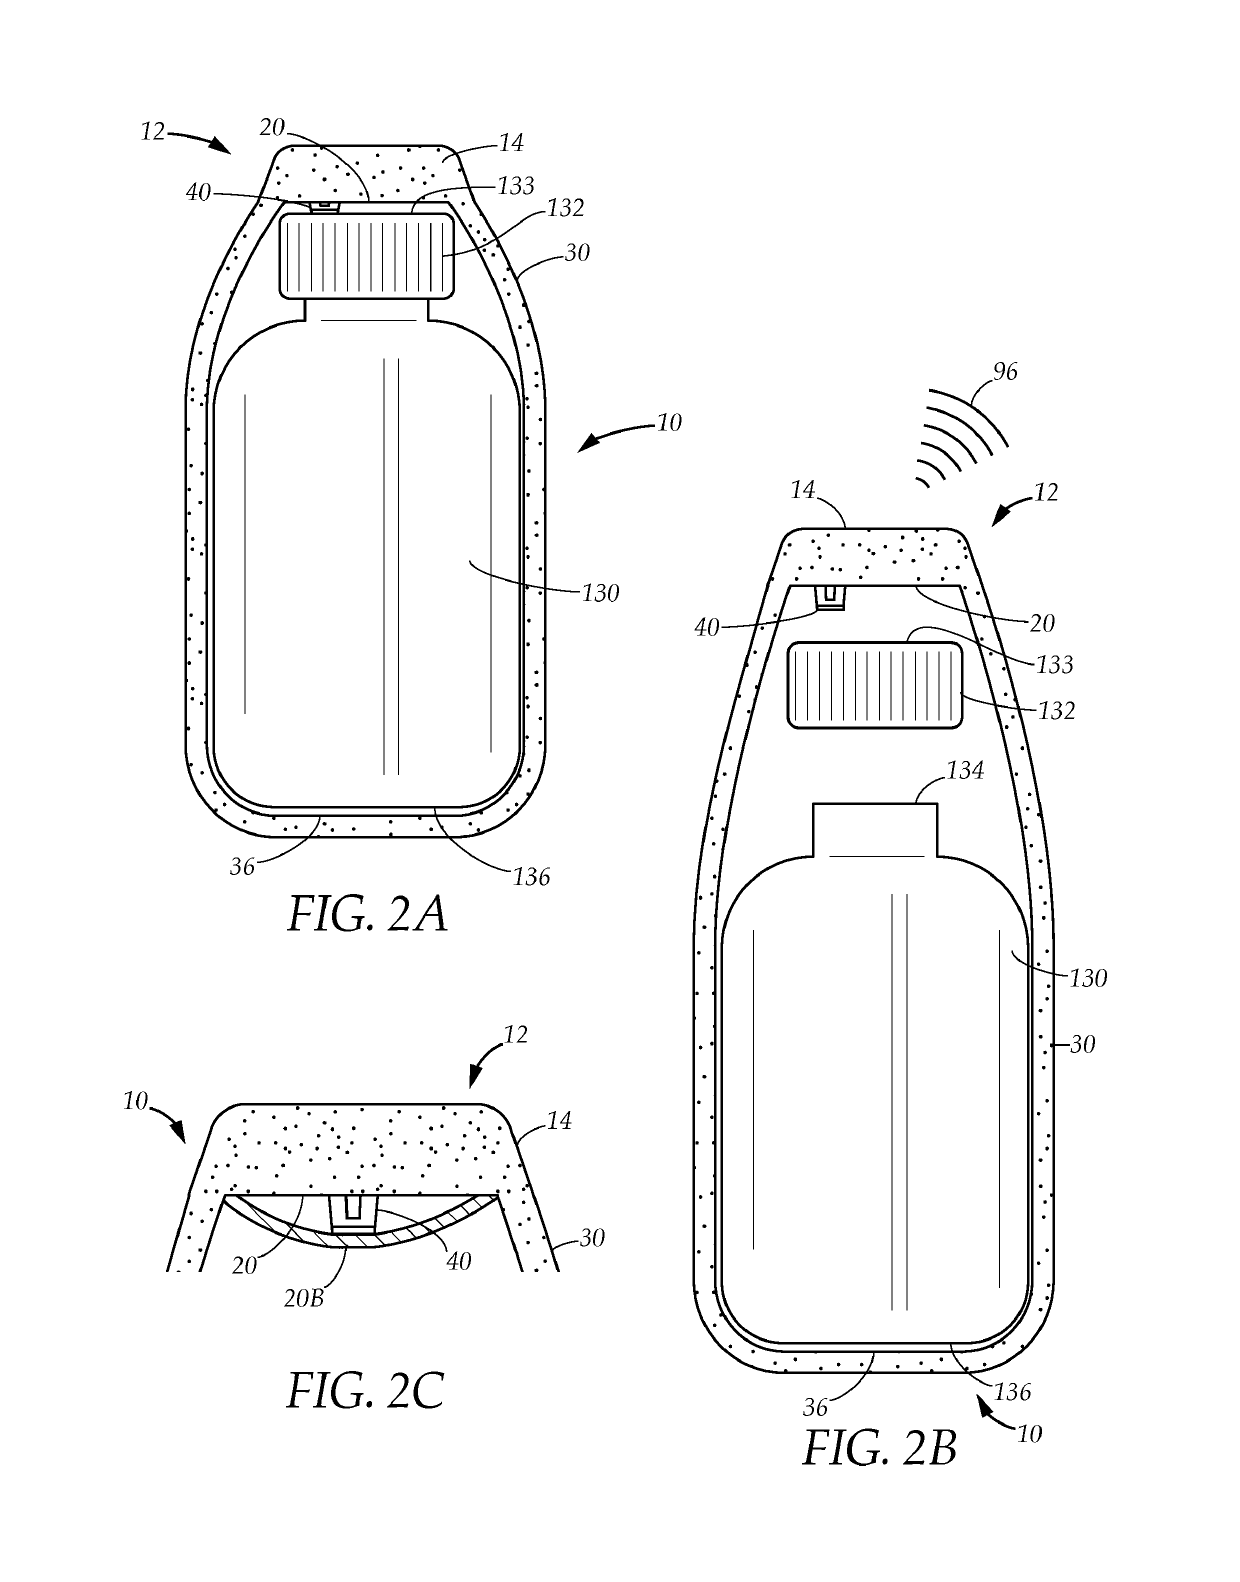 Security band for securing and detecting access to a container